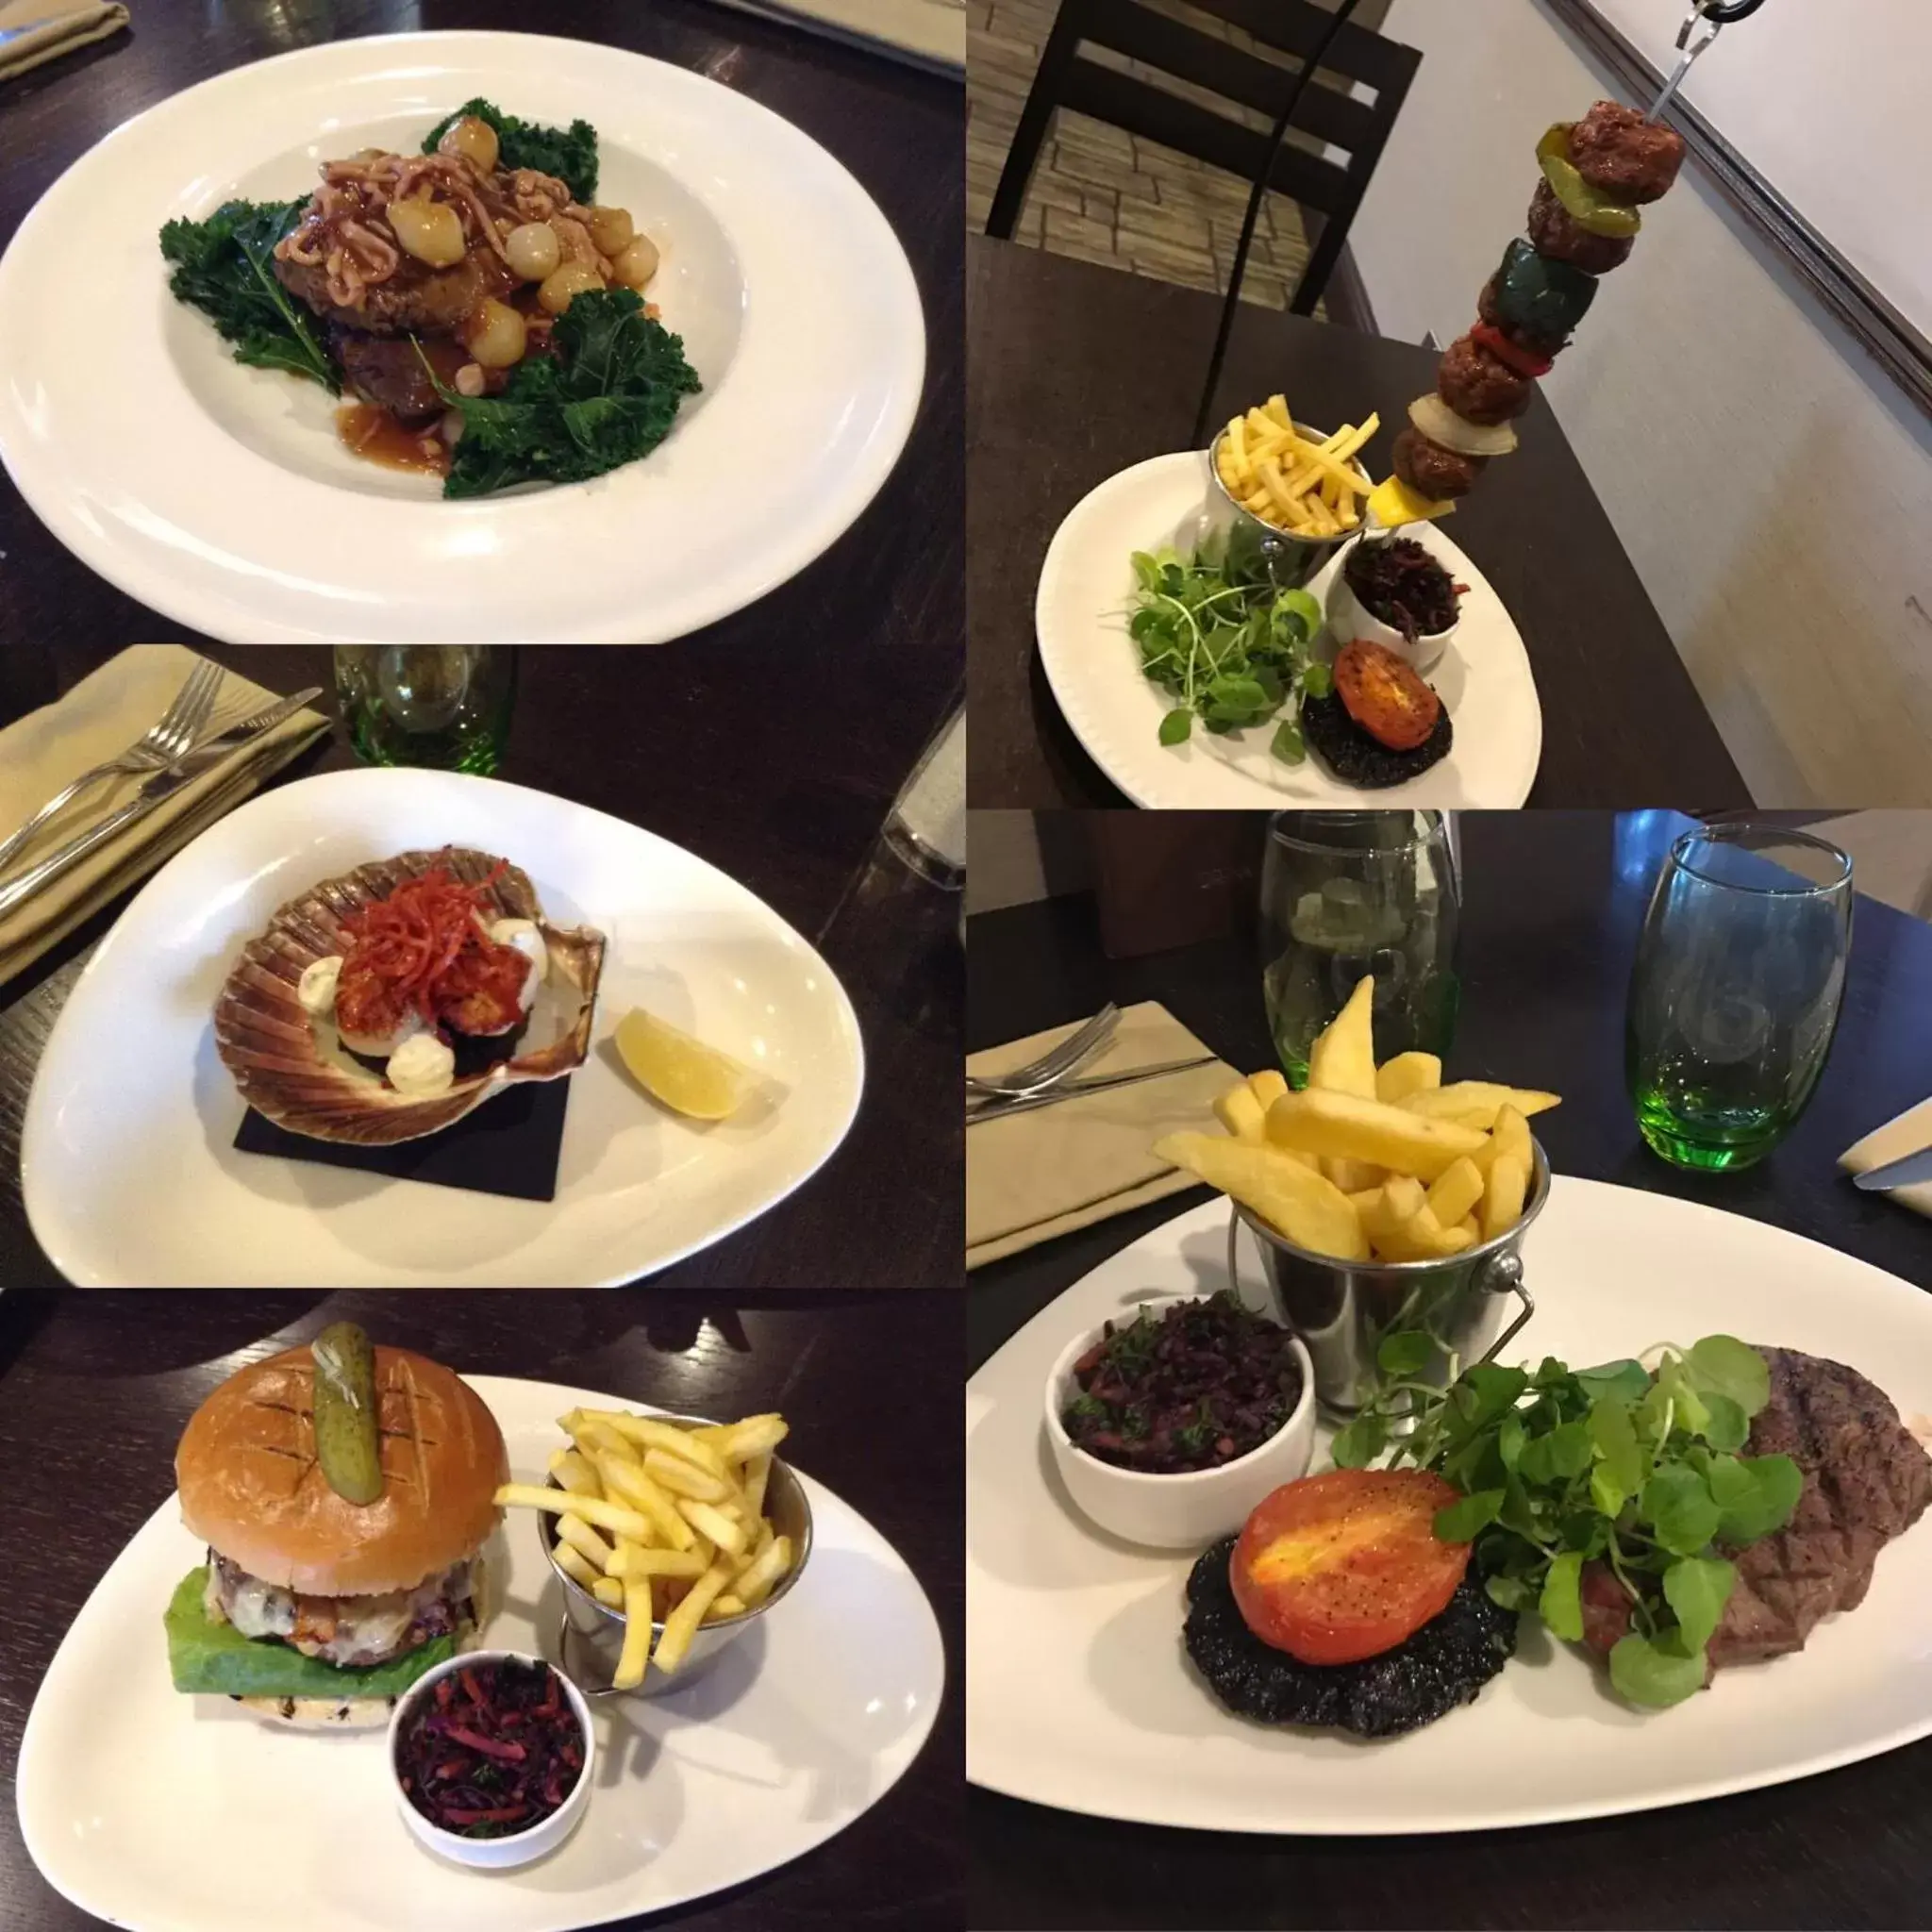 Food, Lunch and Dinner in The Grange Manor